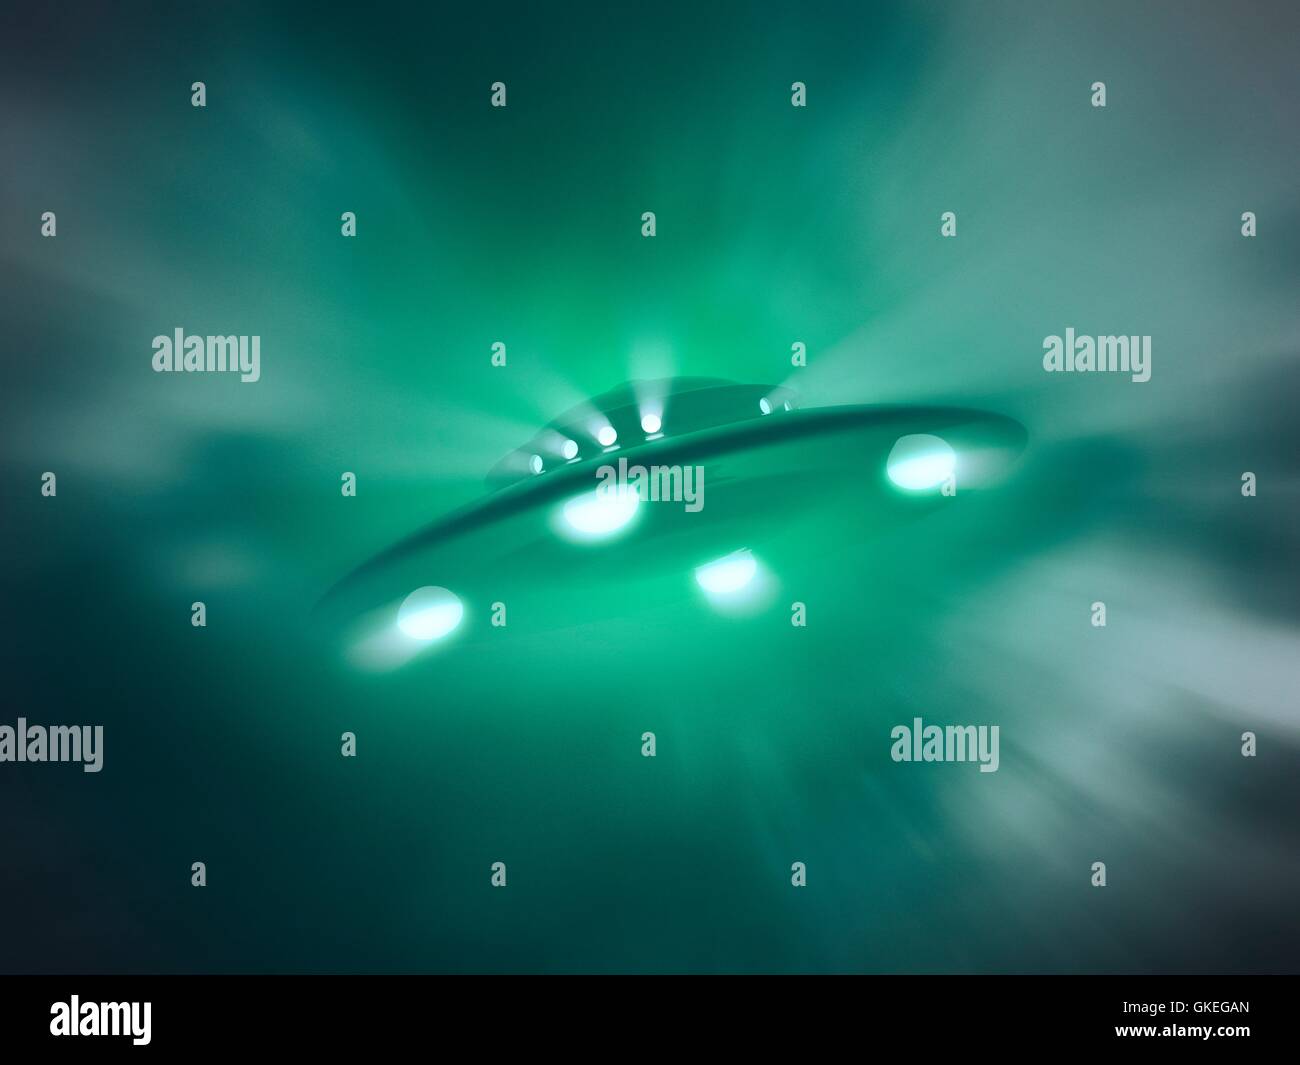 Artwork of a UFO or unidentified flying object. Stock Photo